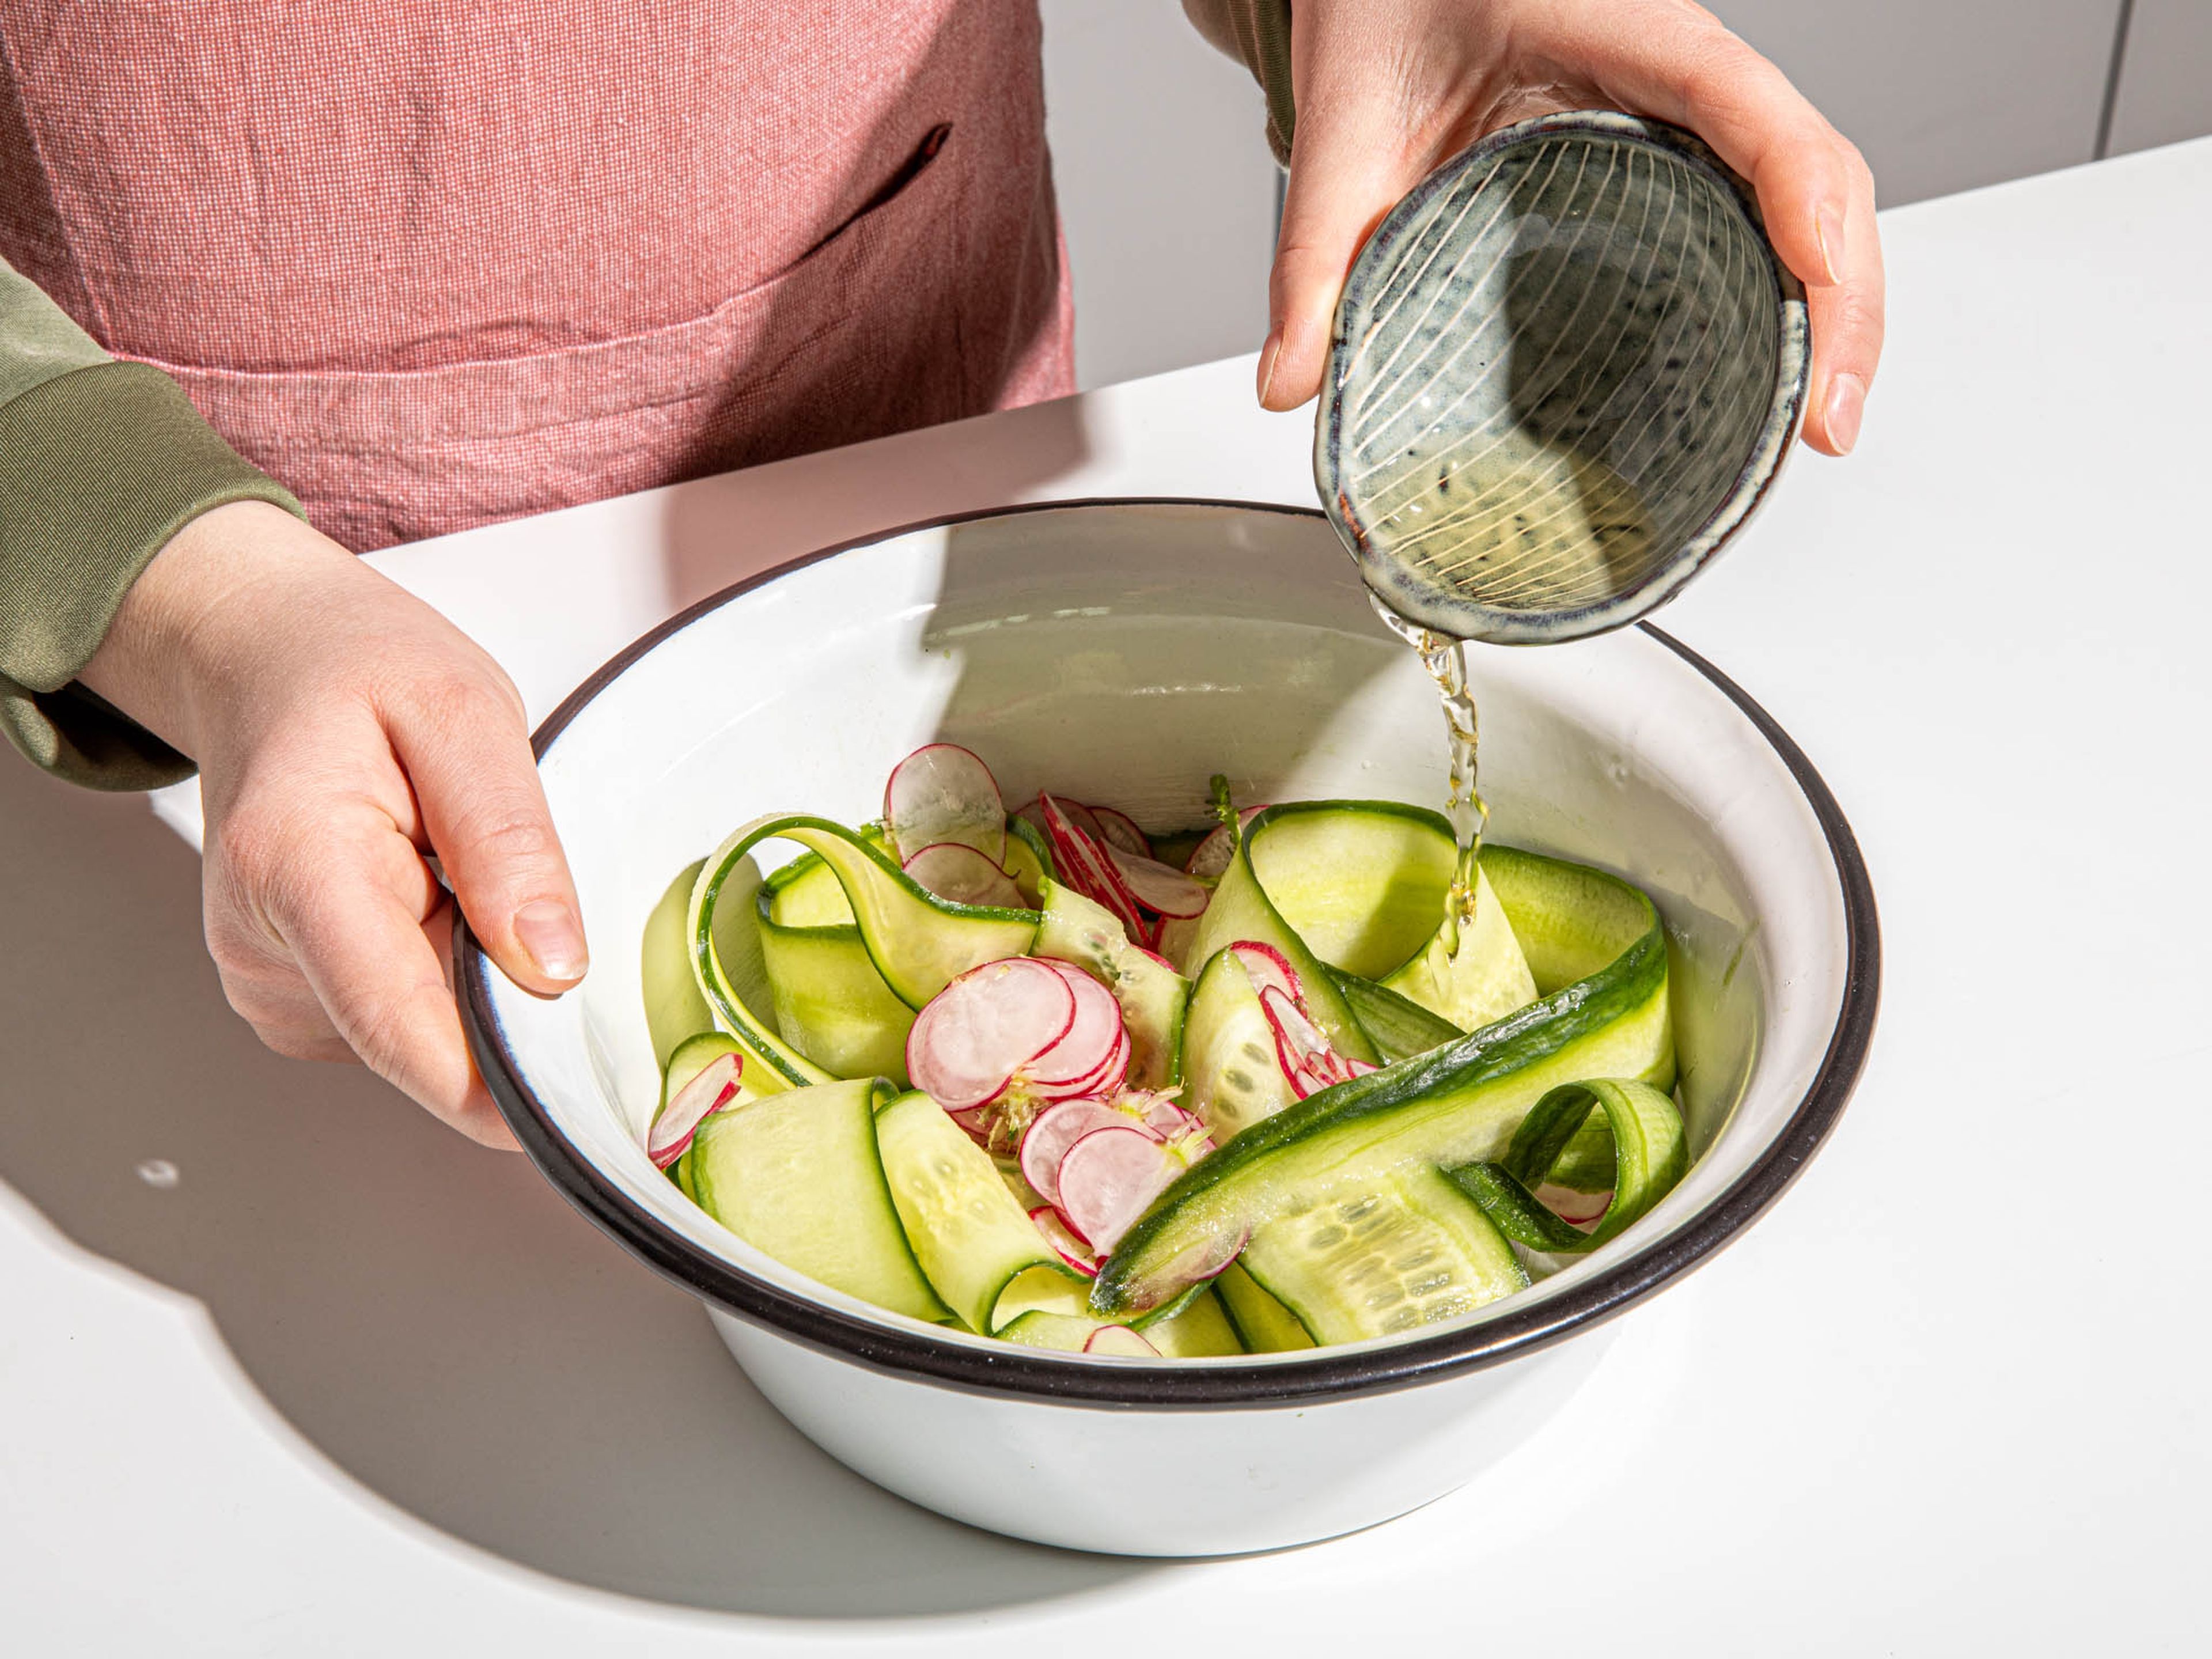 Thinly slice garlic, grate ginger, and set aside. Slice scallions on a diagonal and thinly slice cucumber and radishes. Add cucumber and radish to a medium bowl with rice wine vinegar. Season with salt and massage the vegetables with your hands to soften. Set aside to marinade.